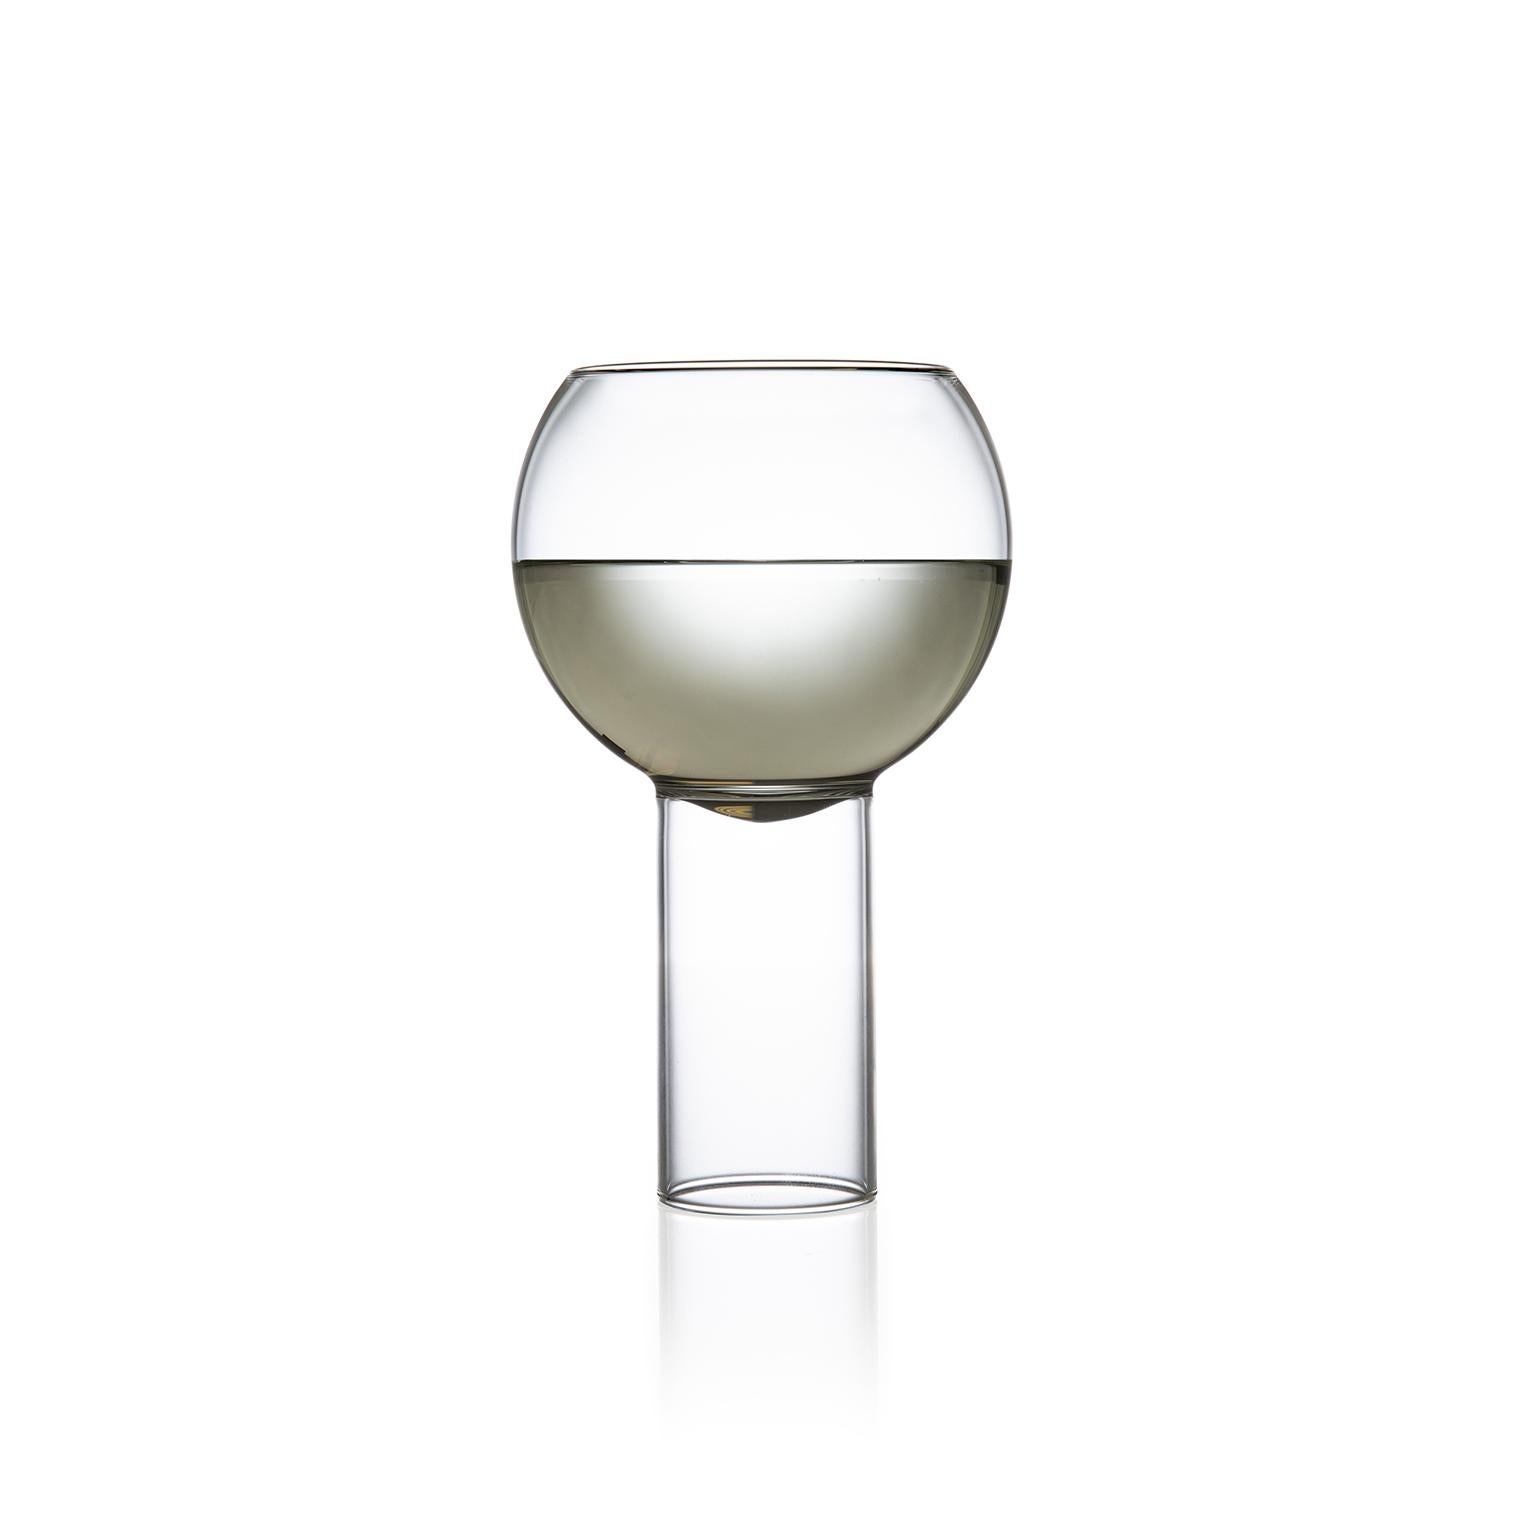 Hand-Crafted EU Clients Pair of Czech Contemporary Tulip Tall Medium Wine Glasses, in Stock